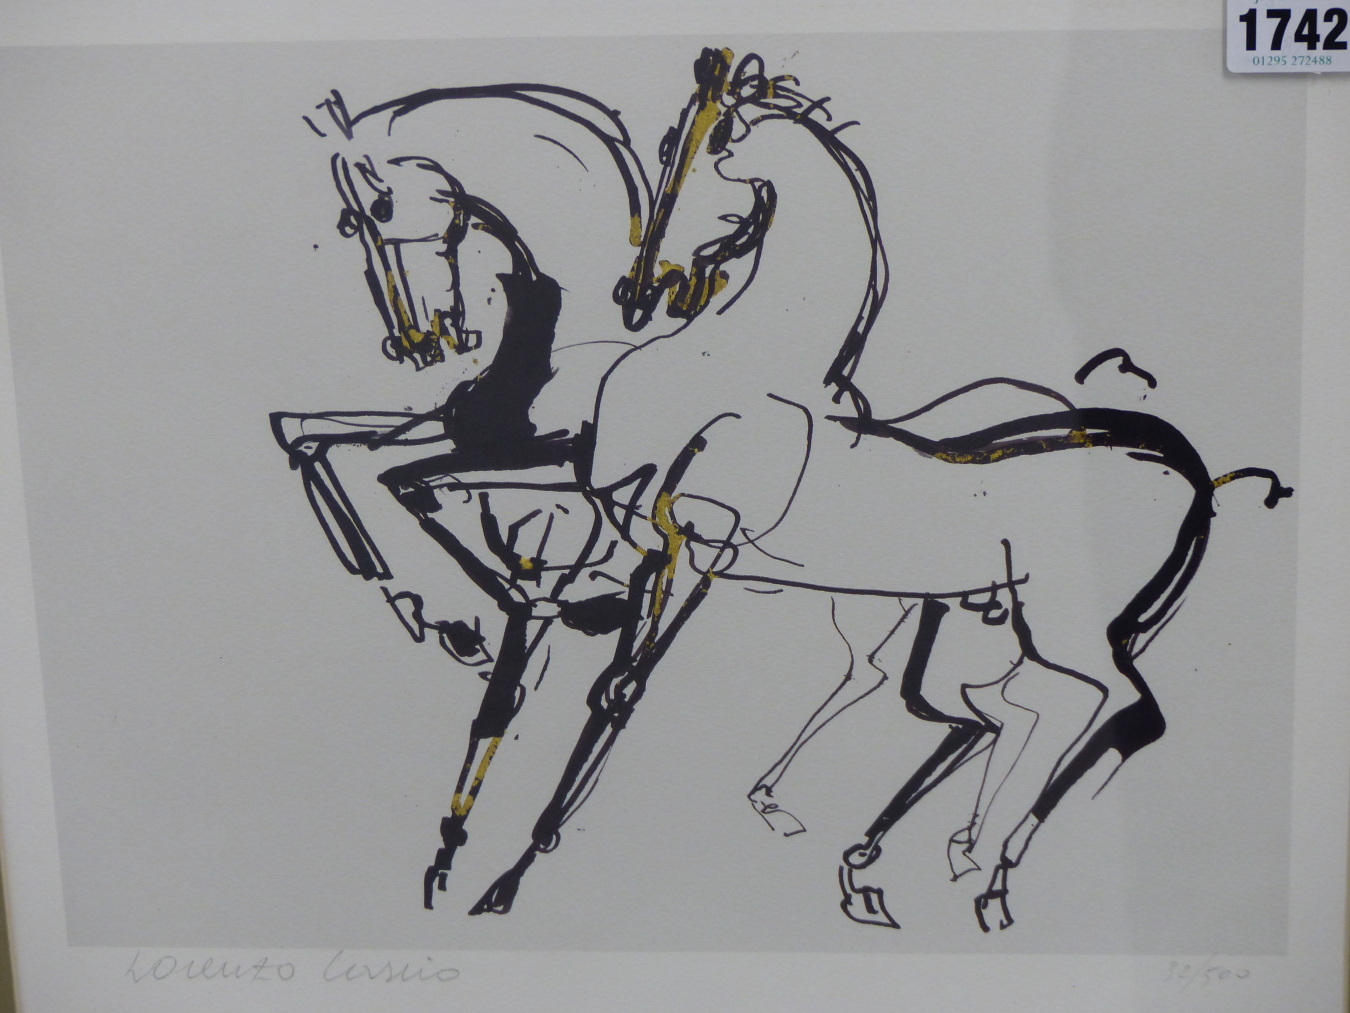 AFTER LORENZO CASCIO, SICILLIAN B.1940. ABSTRACT DEPICTION OF PREFORMING HORSES. NUMBERED EDITION